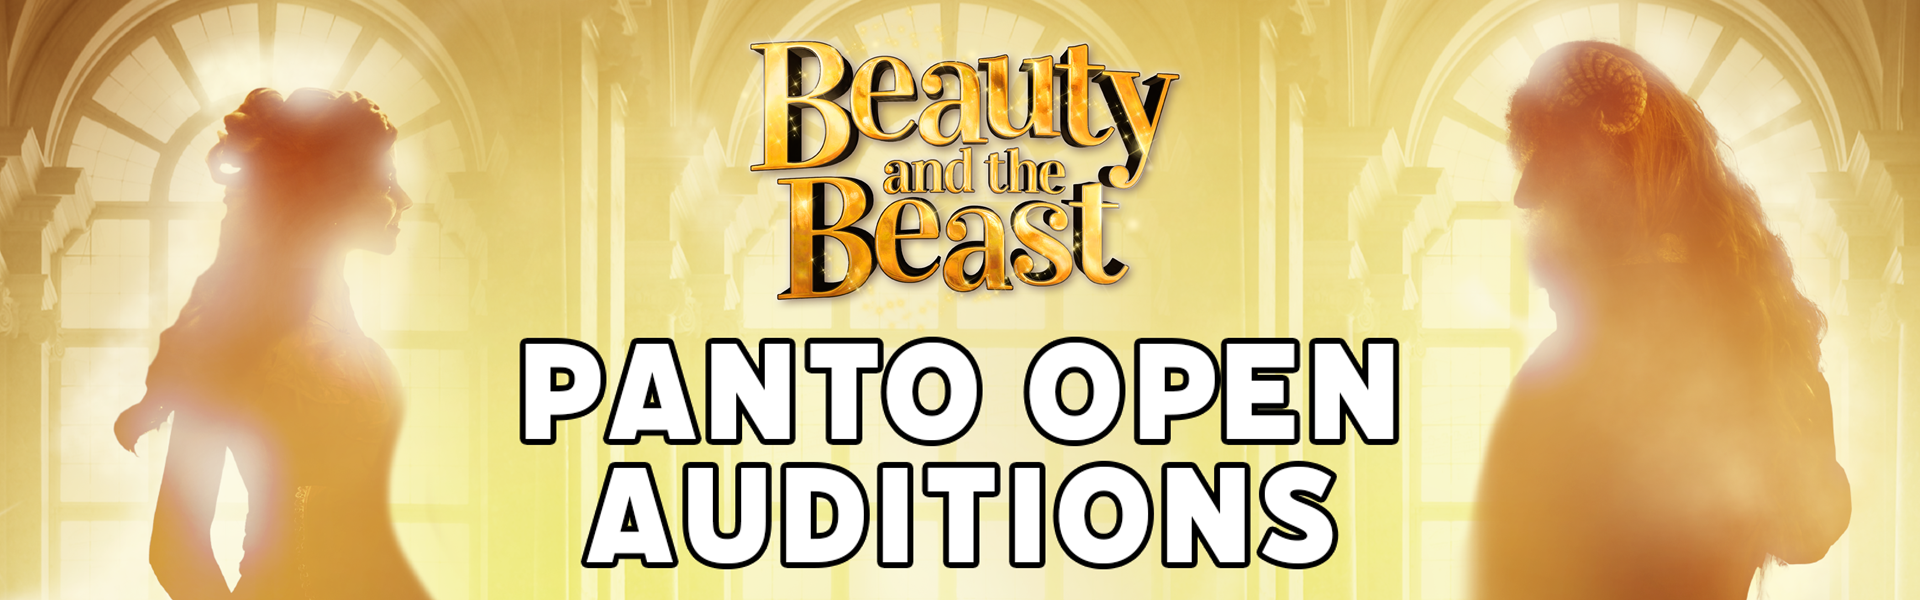 Open Ensemble Auditions for Beauty & the Beast